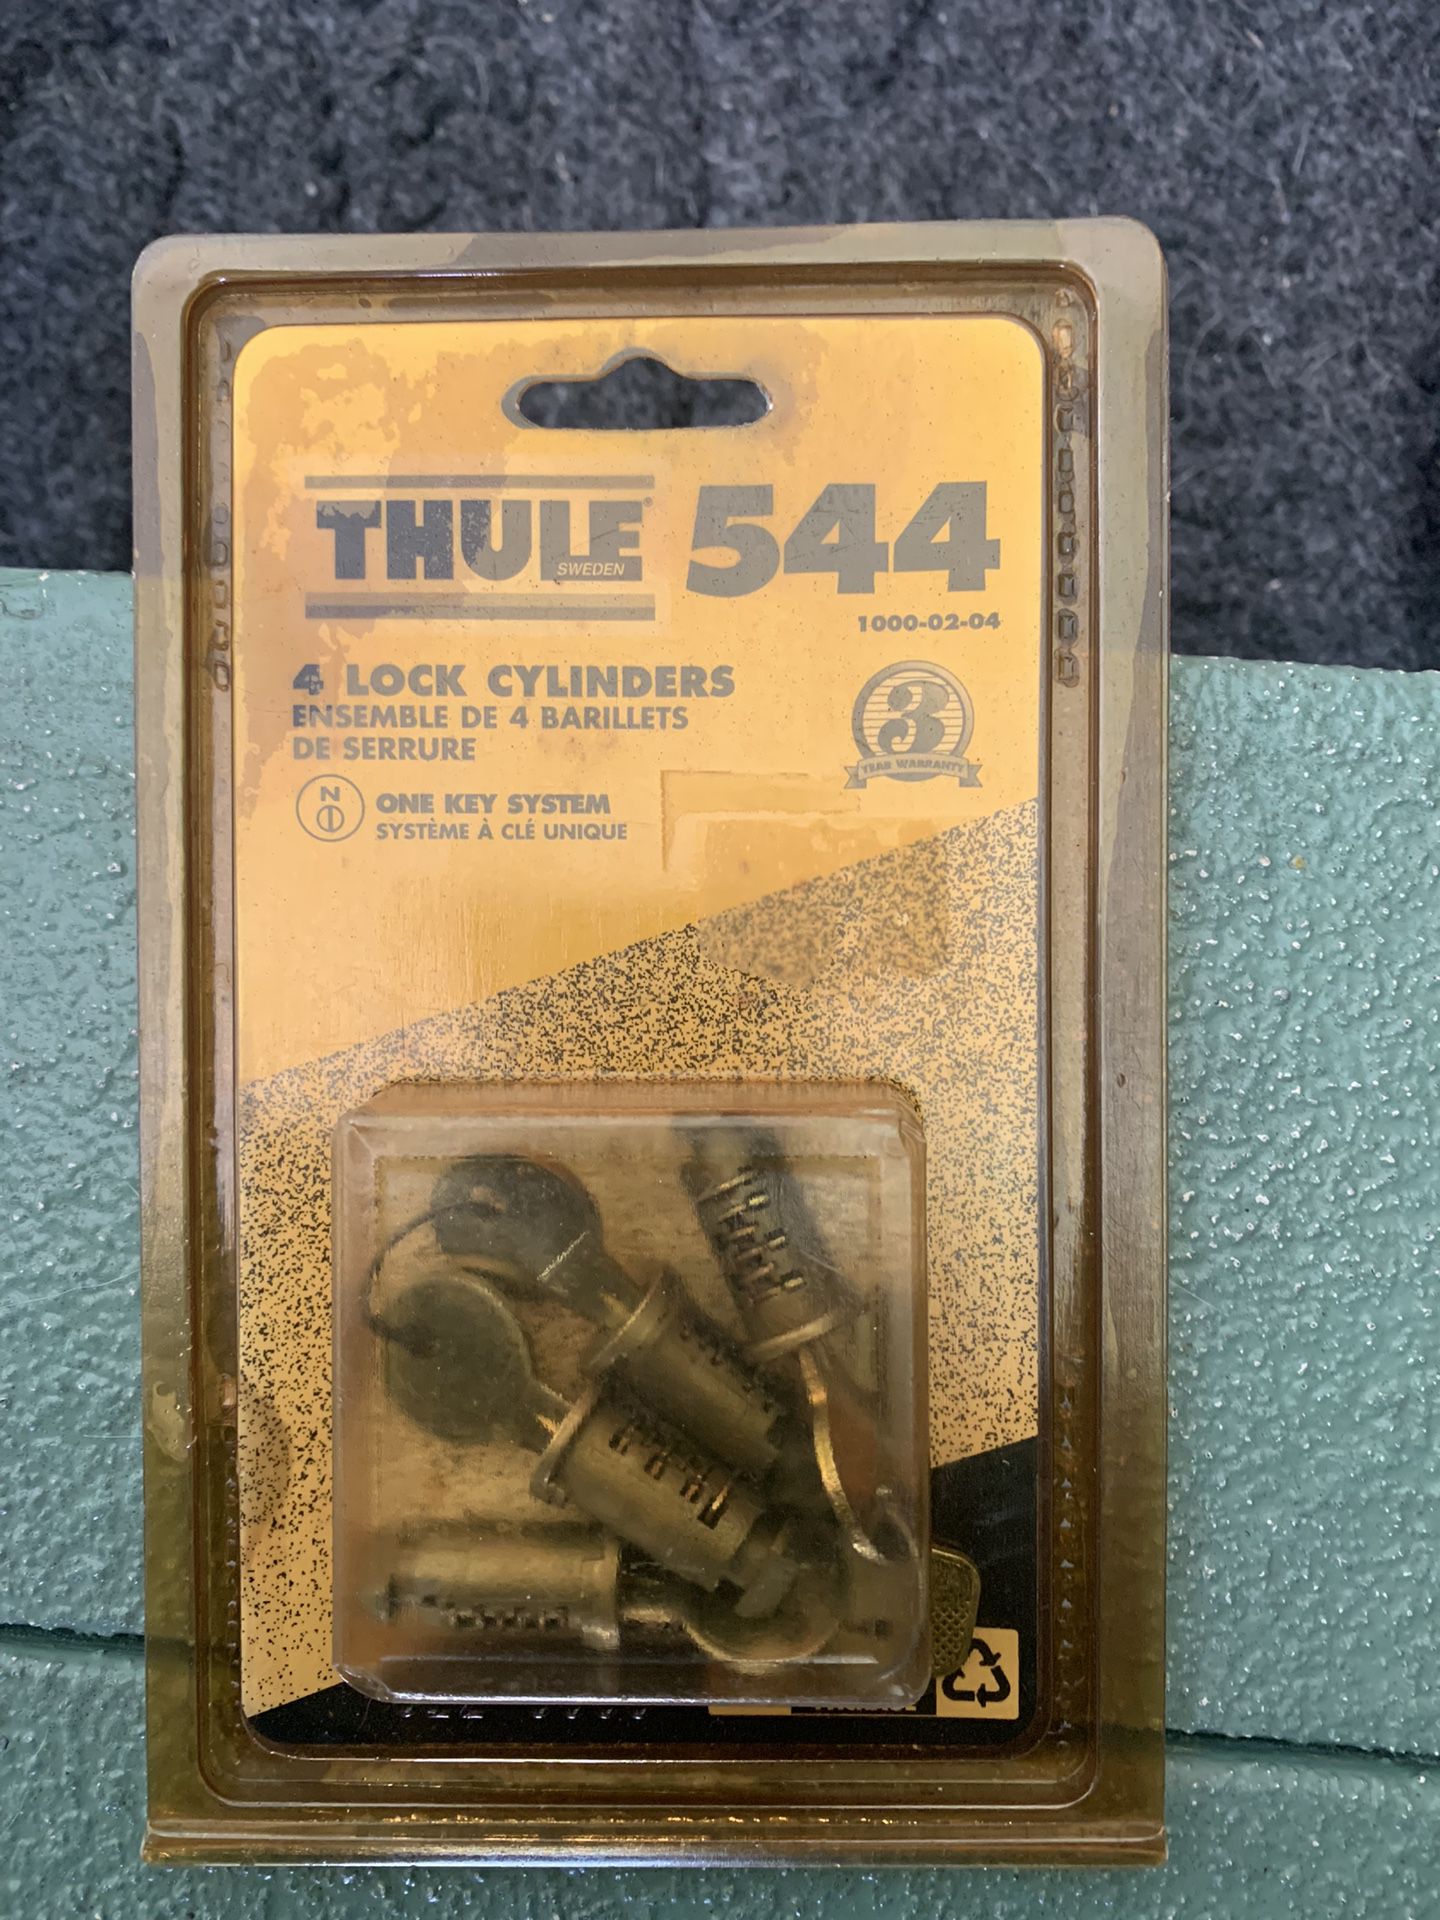 Thule 544 4 Lock Cylinders With Keys.